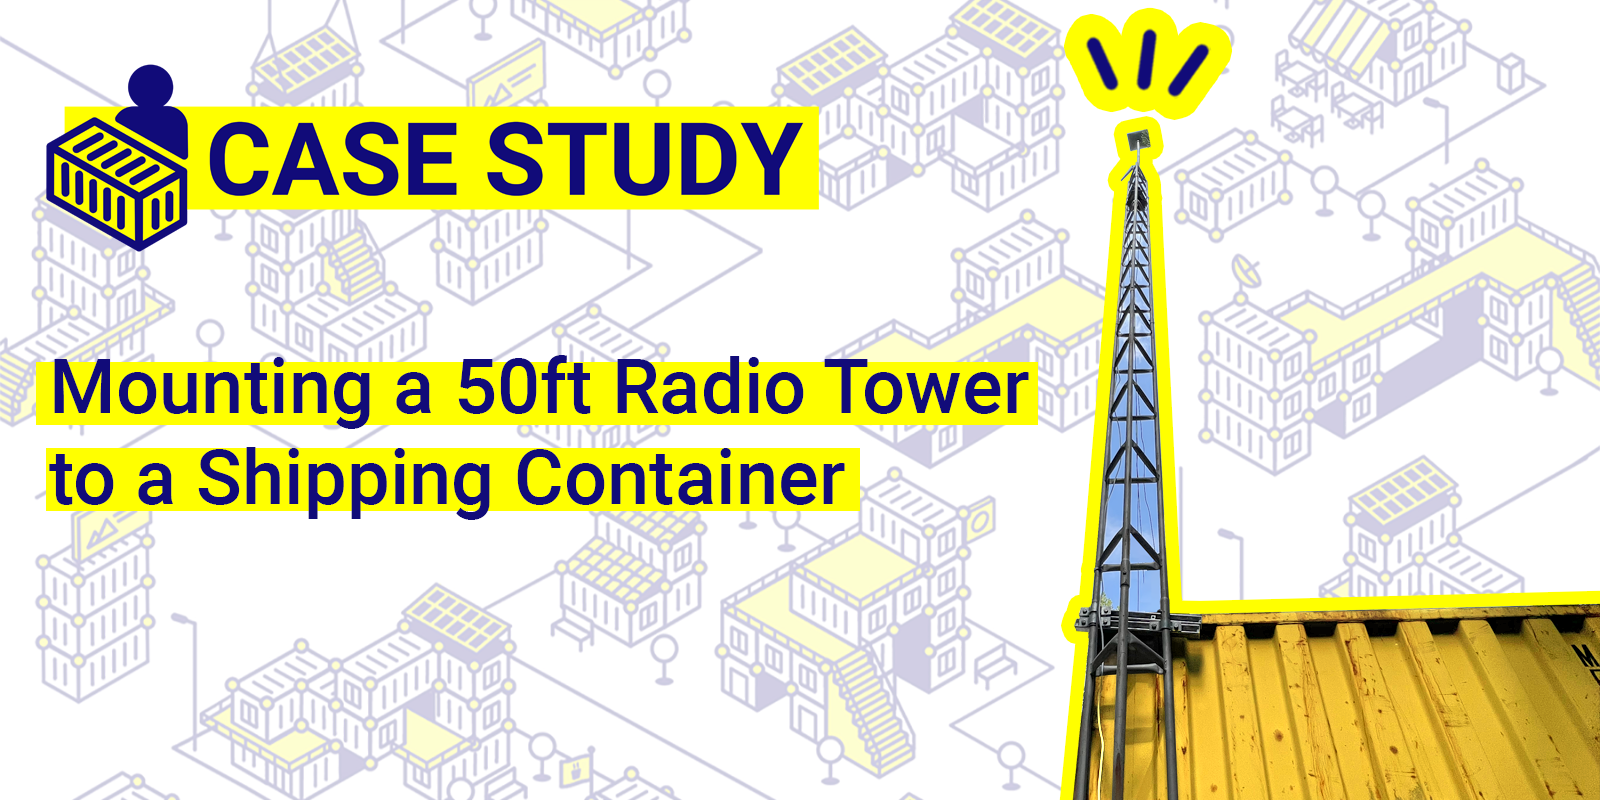 Mounting a 50ft radio tower to a shipping container